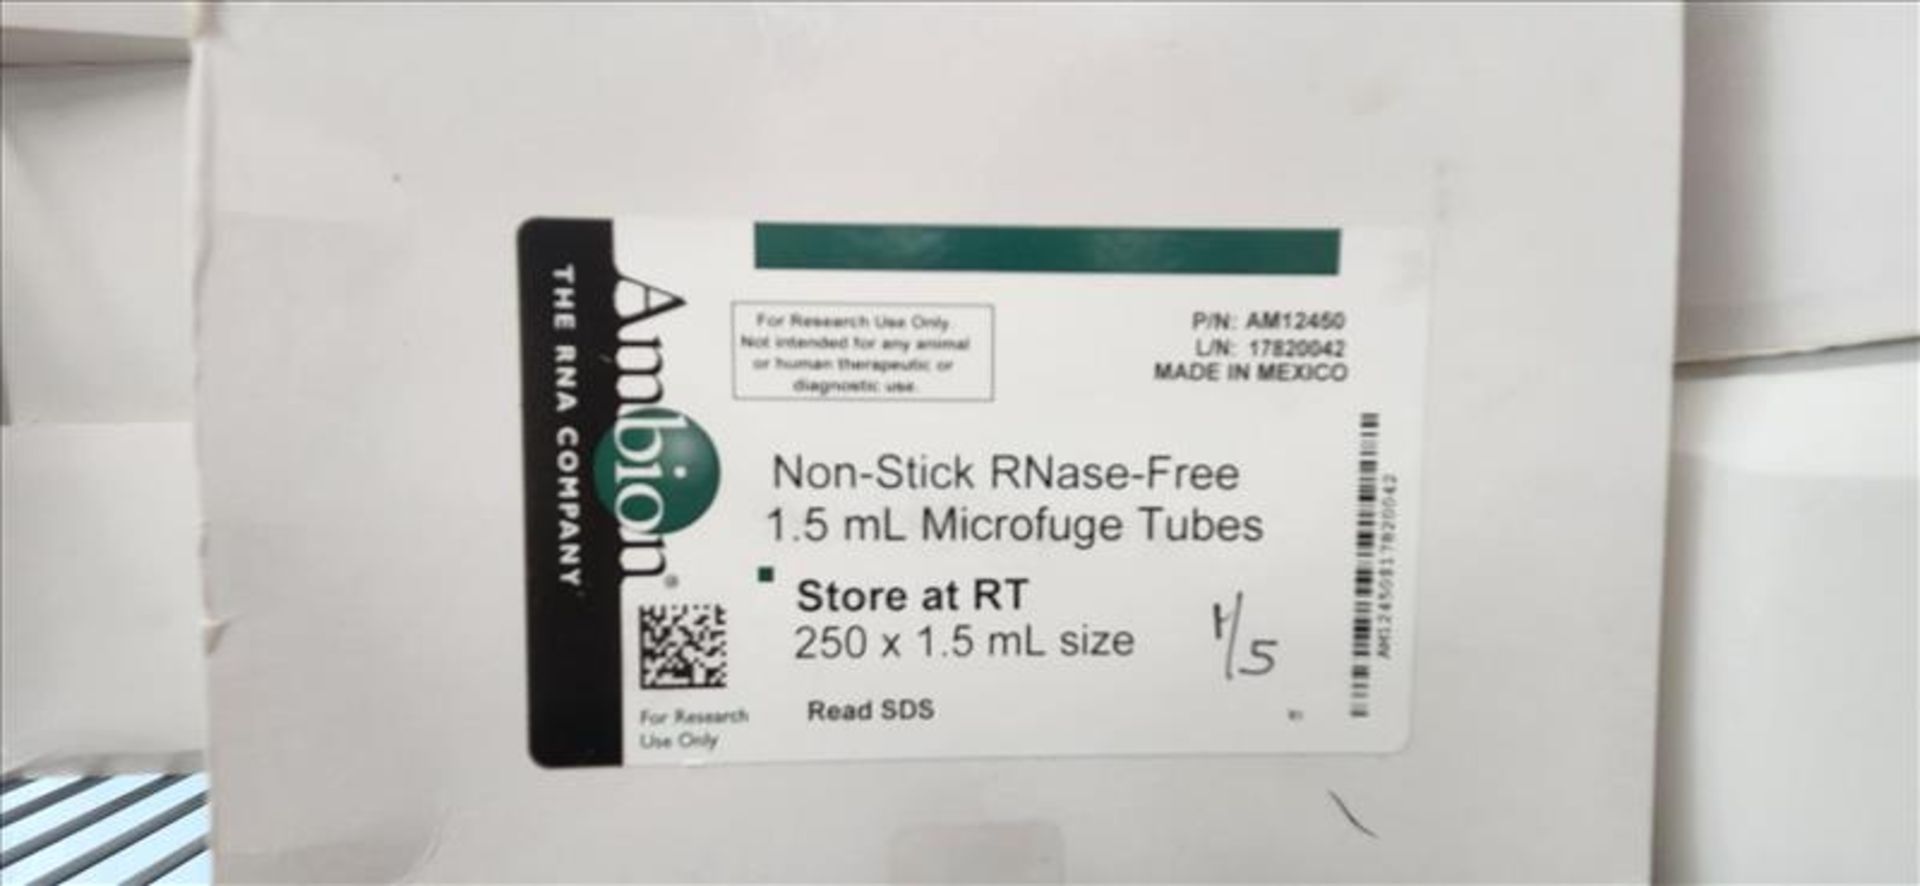 Lot of Ambion Non-Stick Rnase-Free 1.5 mL Microfuge Tubes - Image 2 of 2